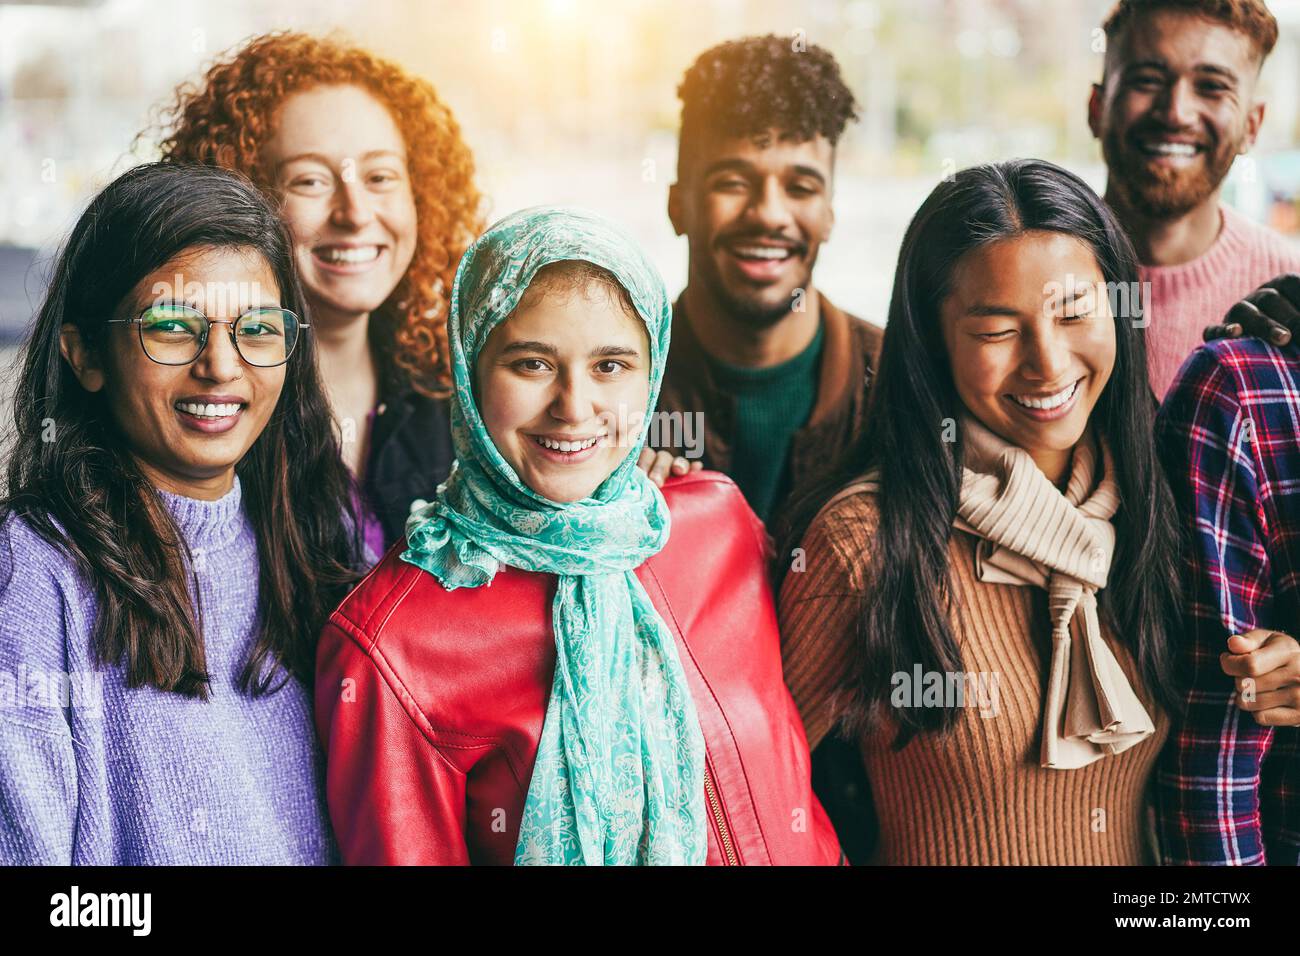 Young diverse people having fun outdoor laughing together - Focus on arabian girl face Stock Photo